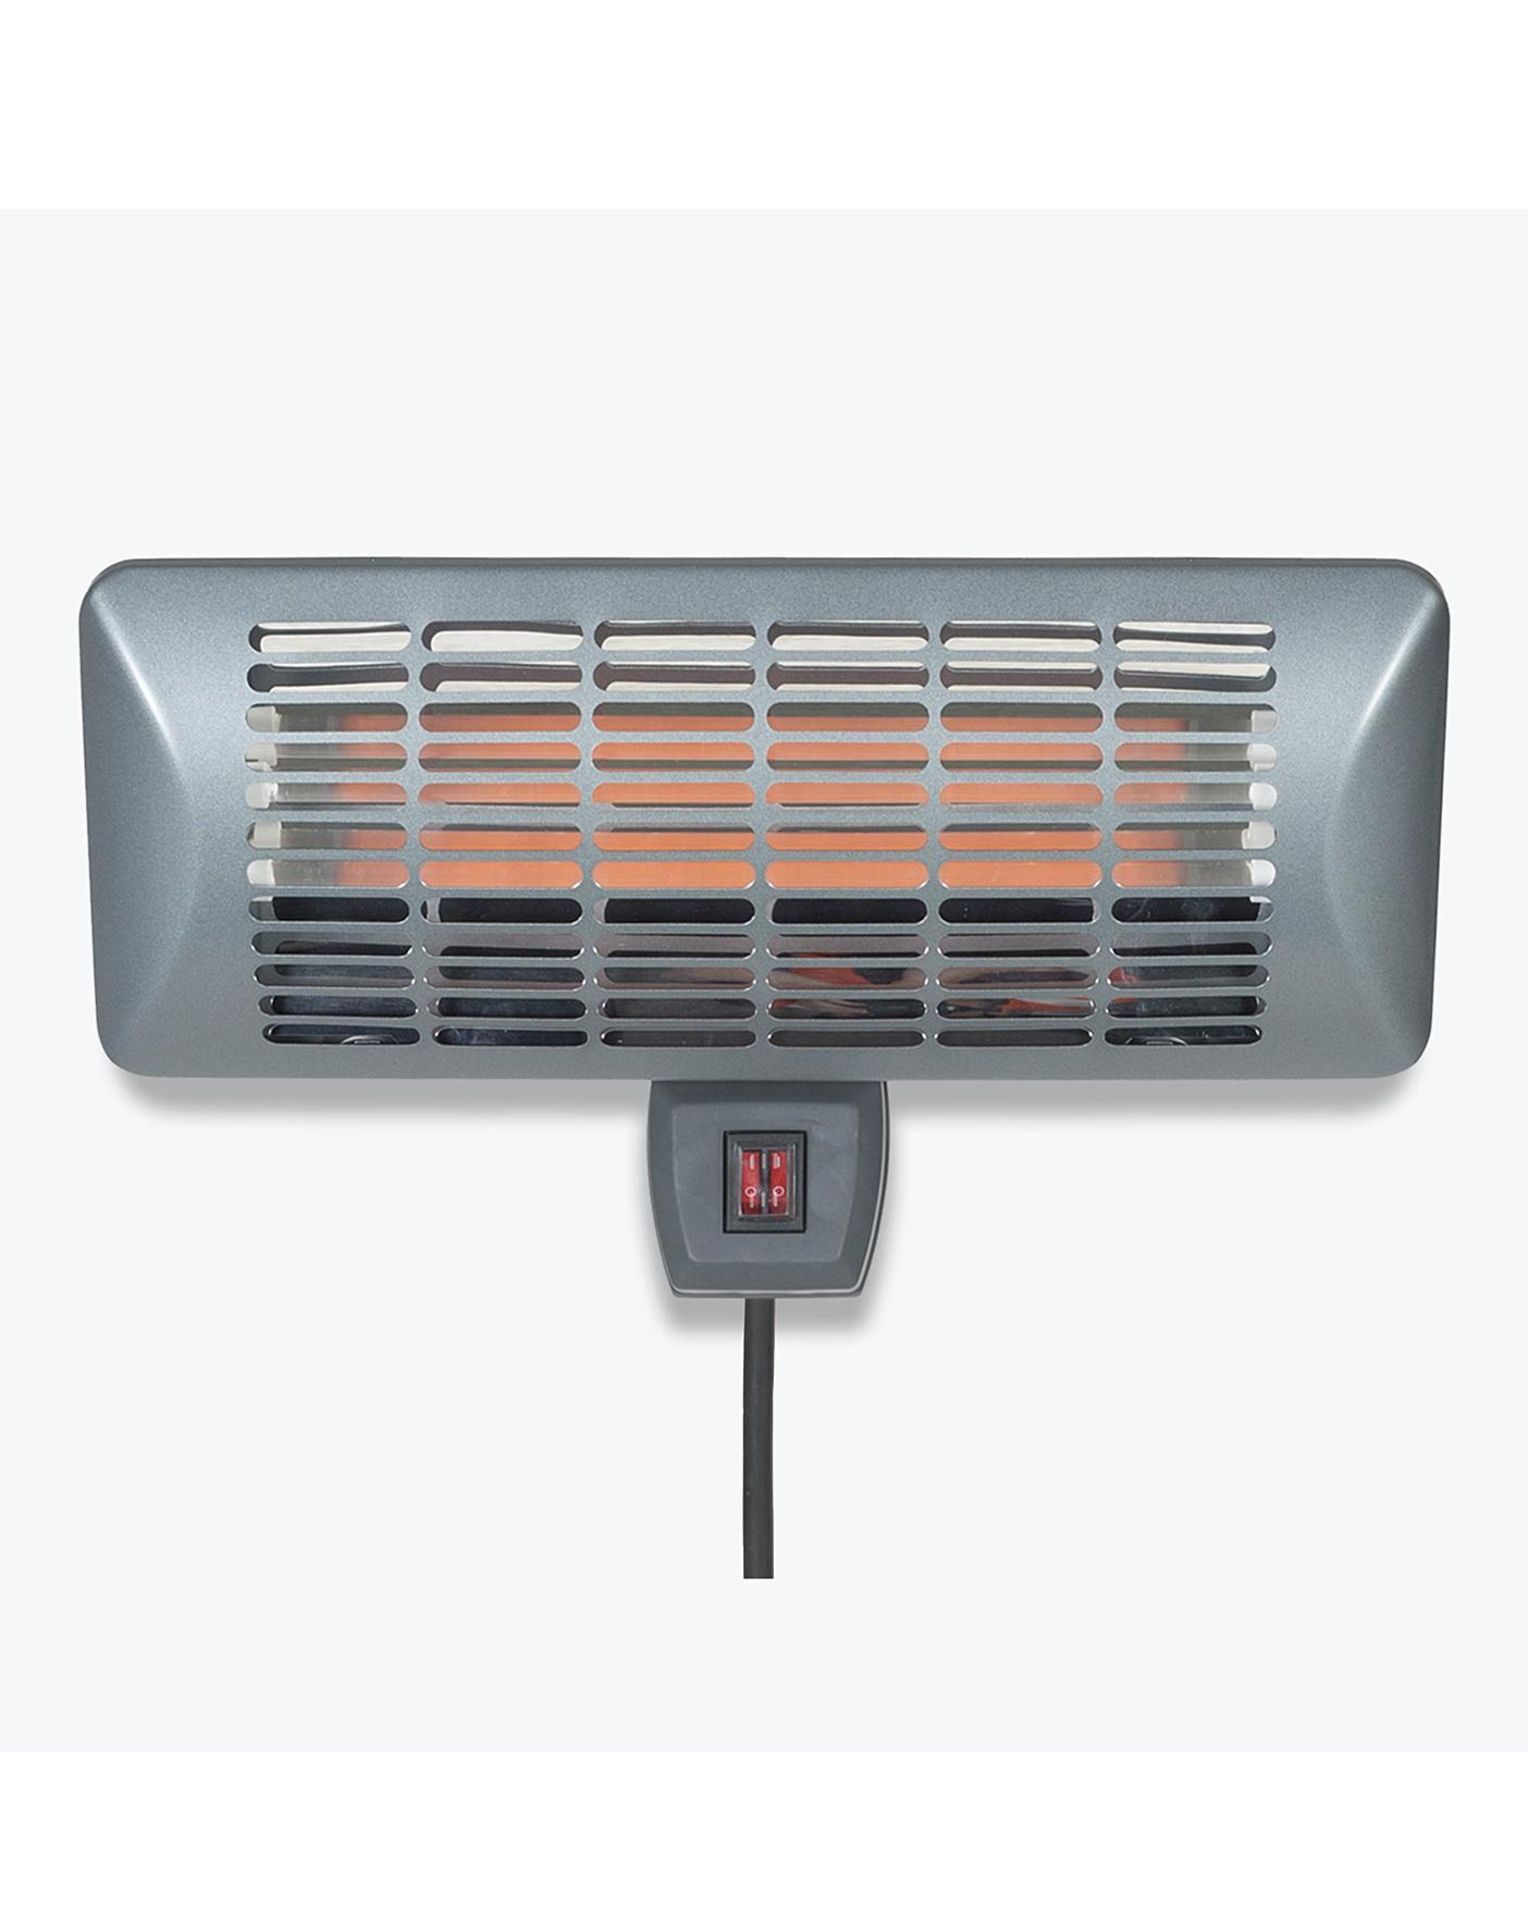 2x NEW & BOXED LA HACIENDA Wall Mounted Quartz Heater. RRP £54.99 EACH. With the Wall Mounted Quartz - Image 3 of 3